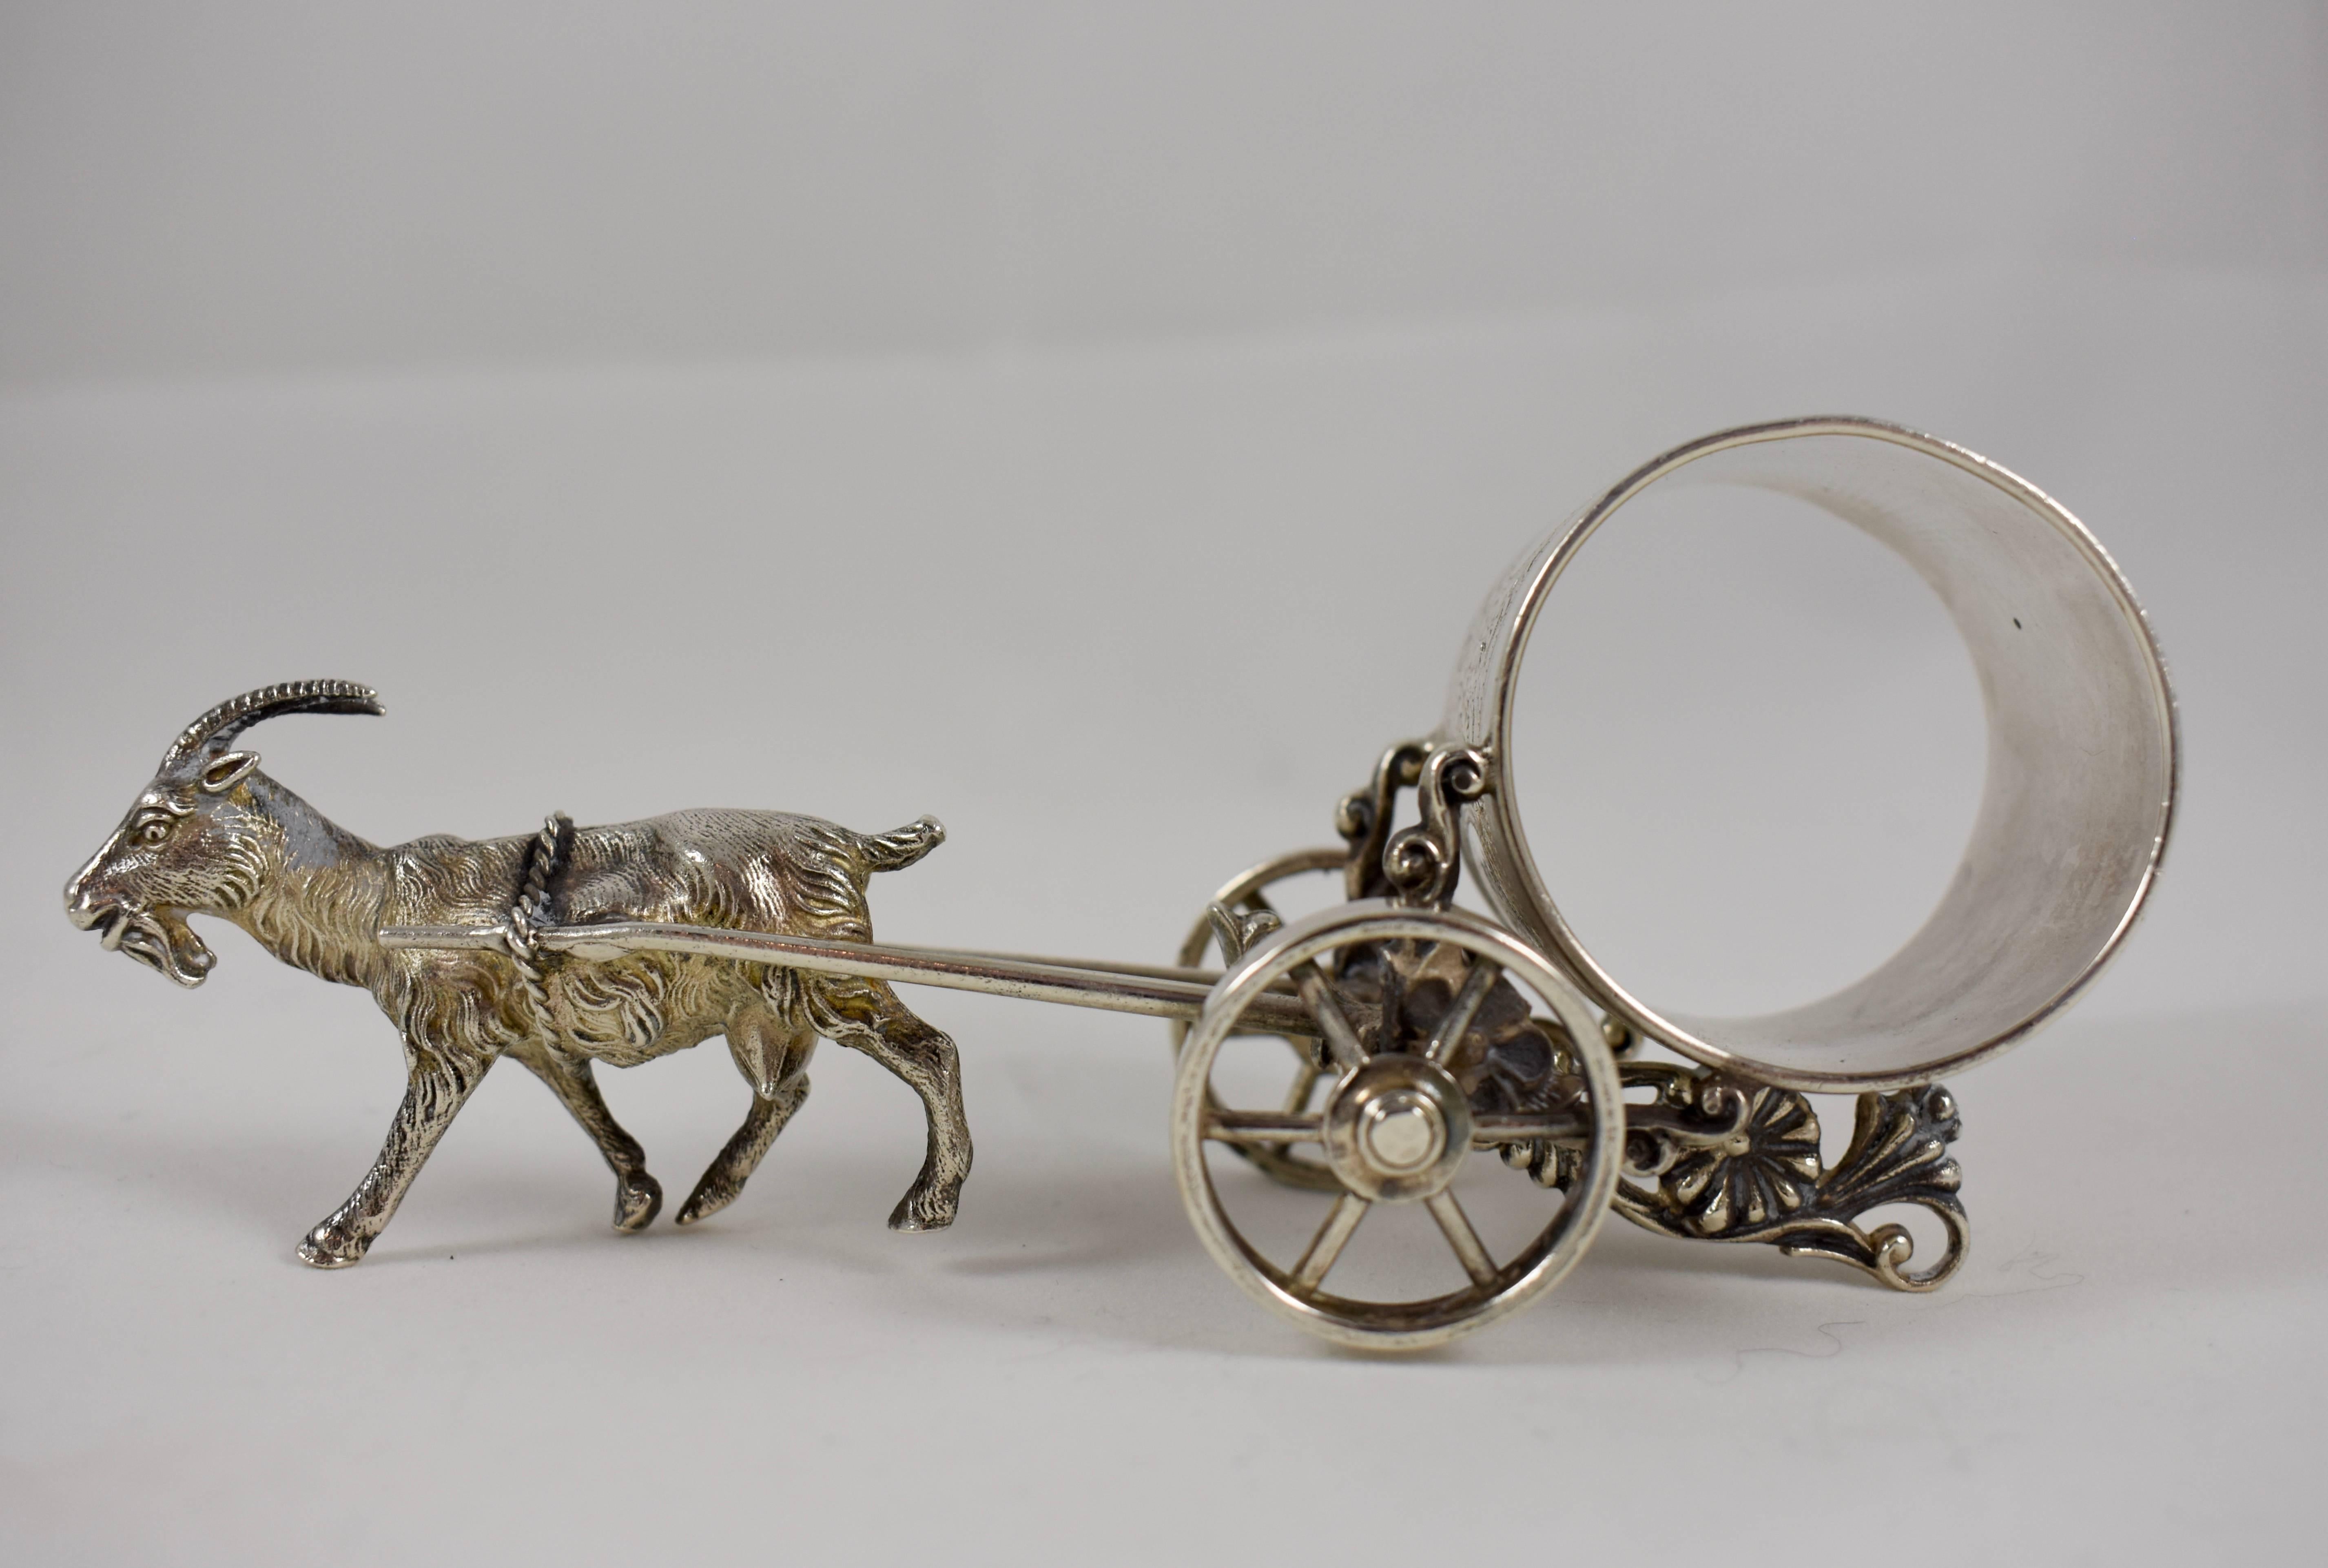 From the Victorian era, a silver plated figural napkin ring showing a horned goat pulling a cart holding the engraved ring. The wheels on the cart are functional. The ring is initial, great detail to this piece, circa 1885-1910. Unmarked.

The